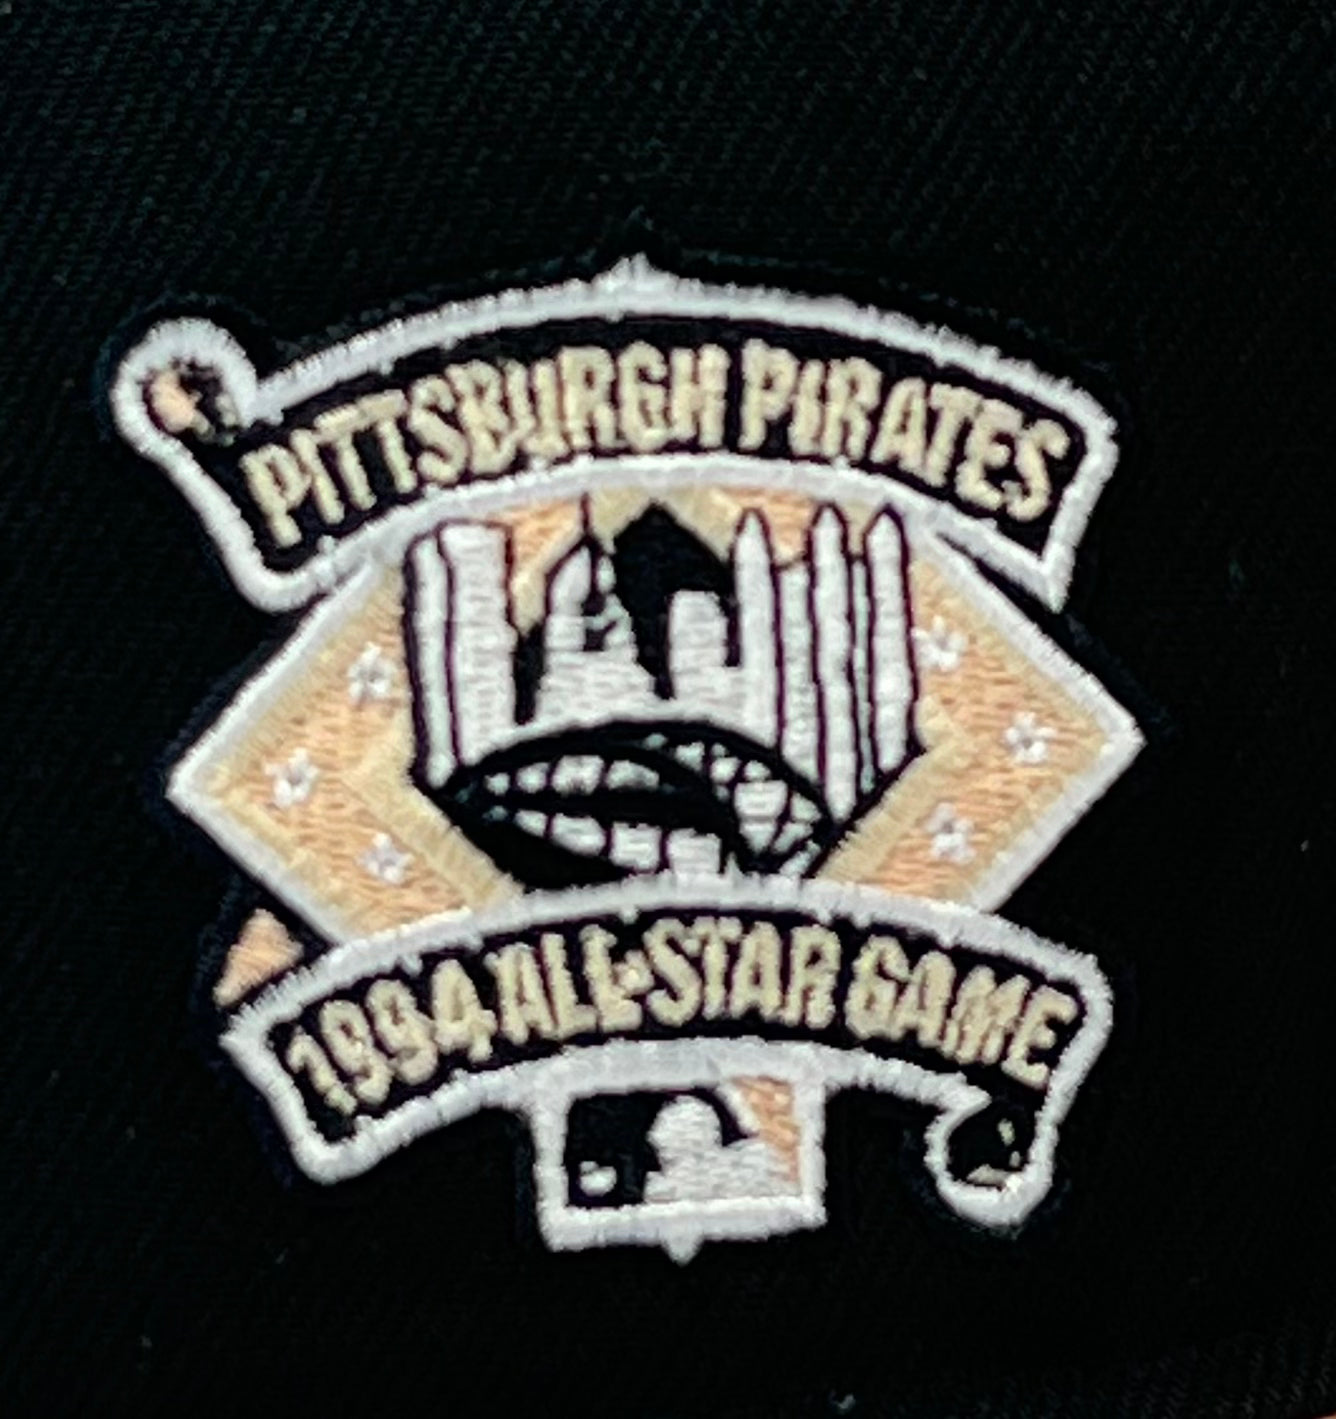 PITTSBURGH PIRATES (BLK/PEACH) (1994 ALLSTARGAME) NEW ERA 59FIFTY FITTED